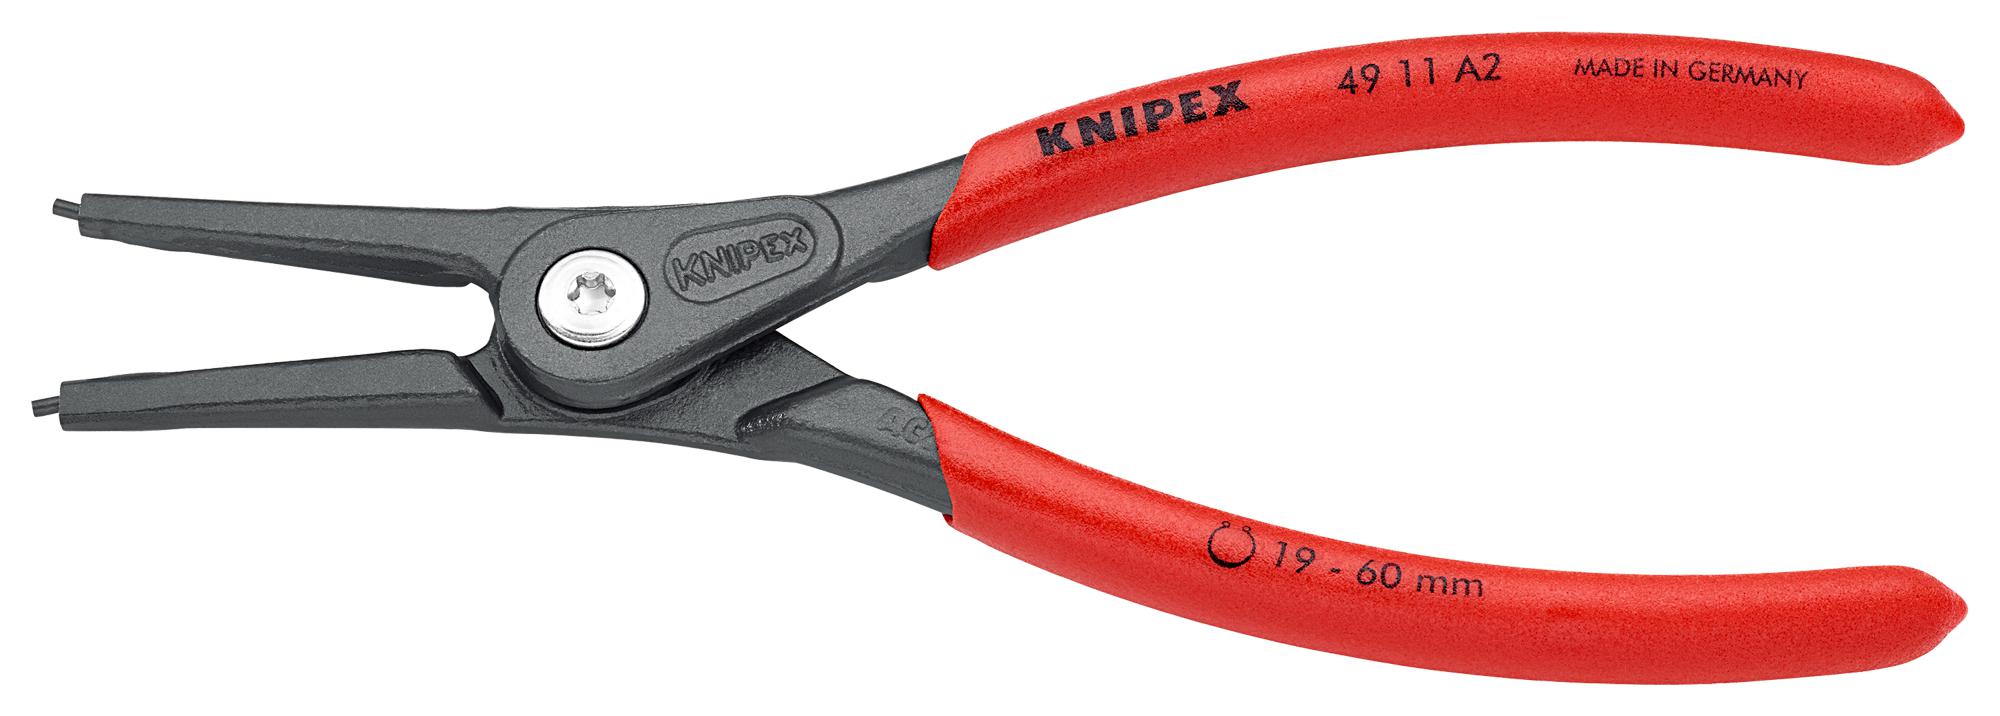 49 11 A2 CIRCLIP PLIER, EXT, STRAIGHT KNIPEX